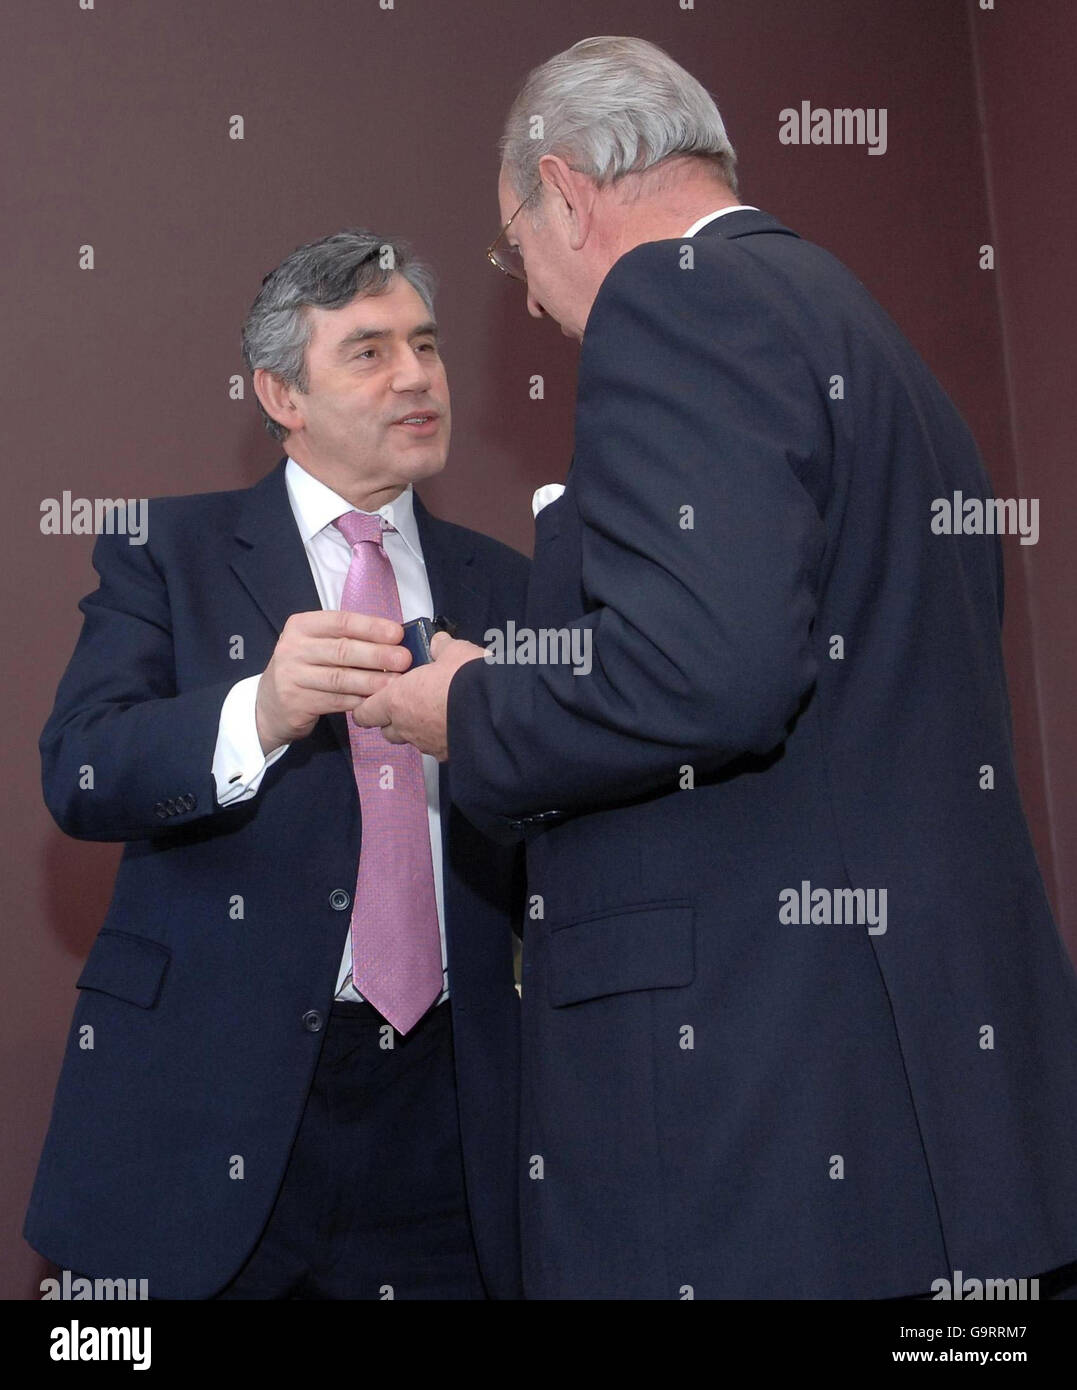 Royal Enginneer veteran Michael Warren receives his 'Armed Forces Veteran's Badge' from Chancellor Gordon Brown at the Imperial War Museum in London today. Stock Photo